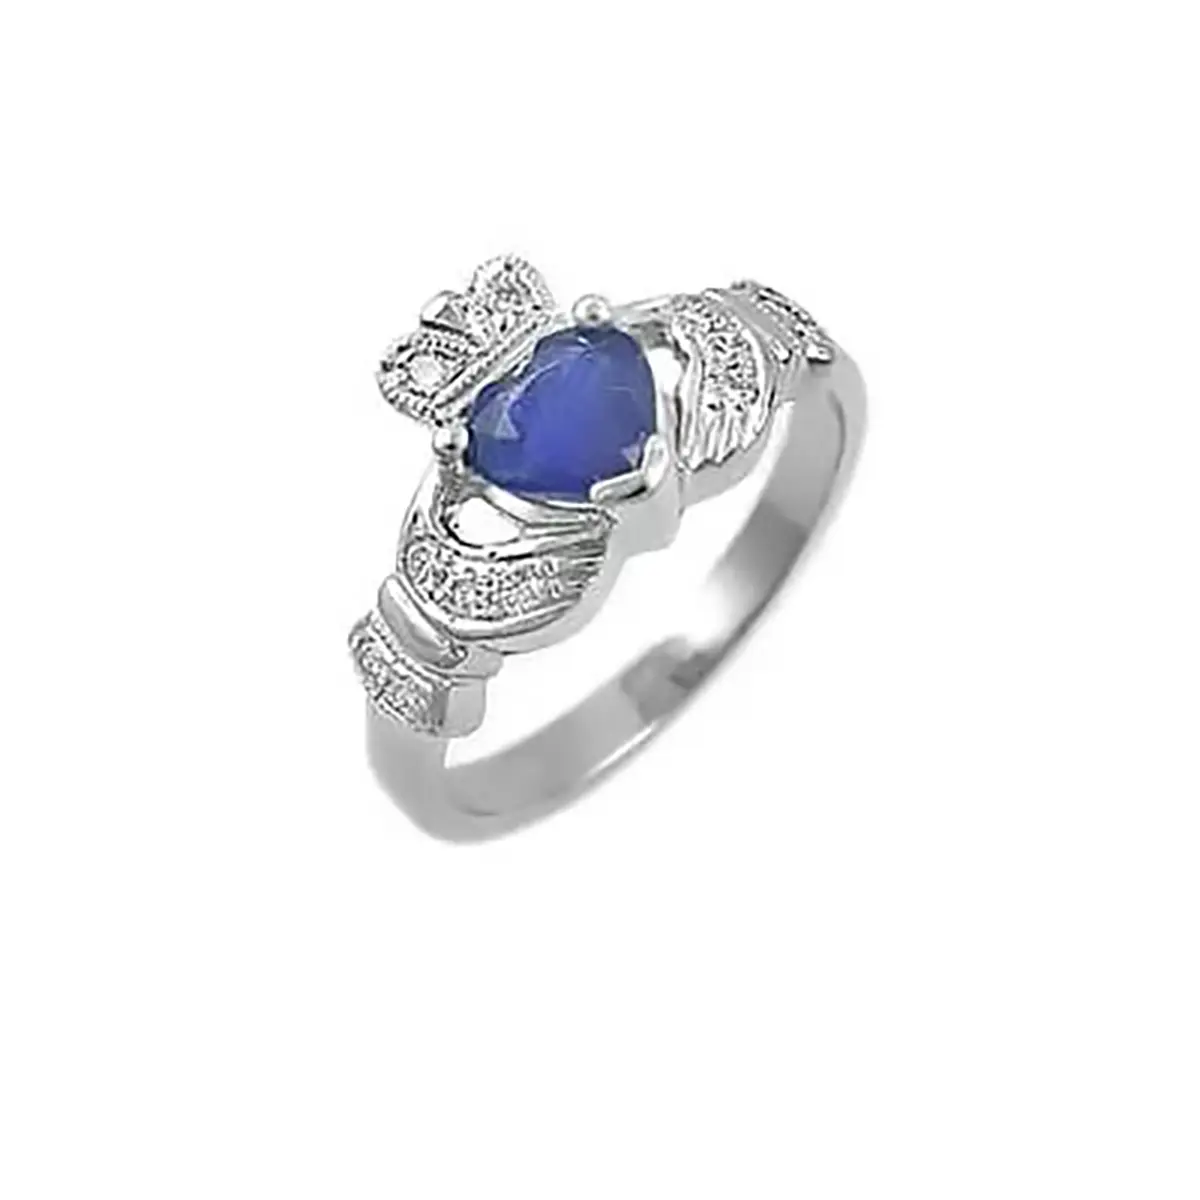 1_white Gold Sapphire Claddagh Ring...